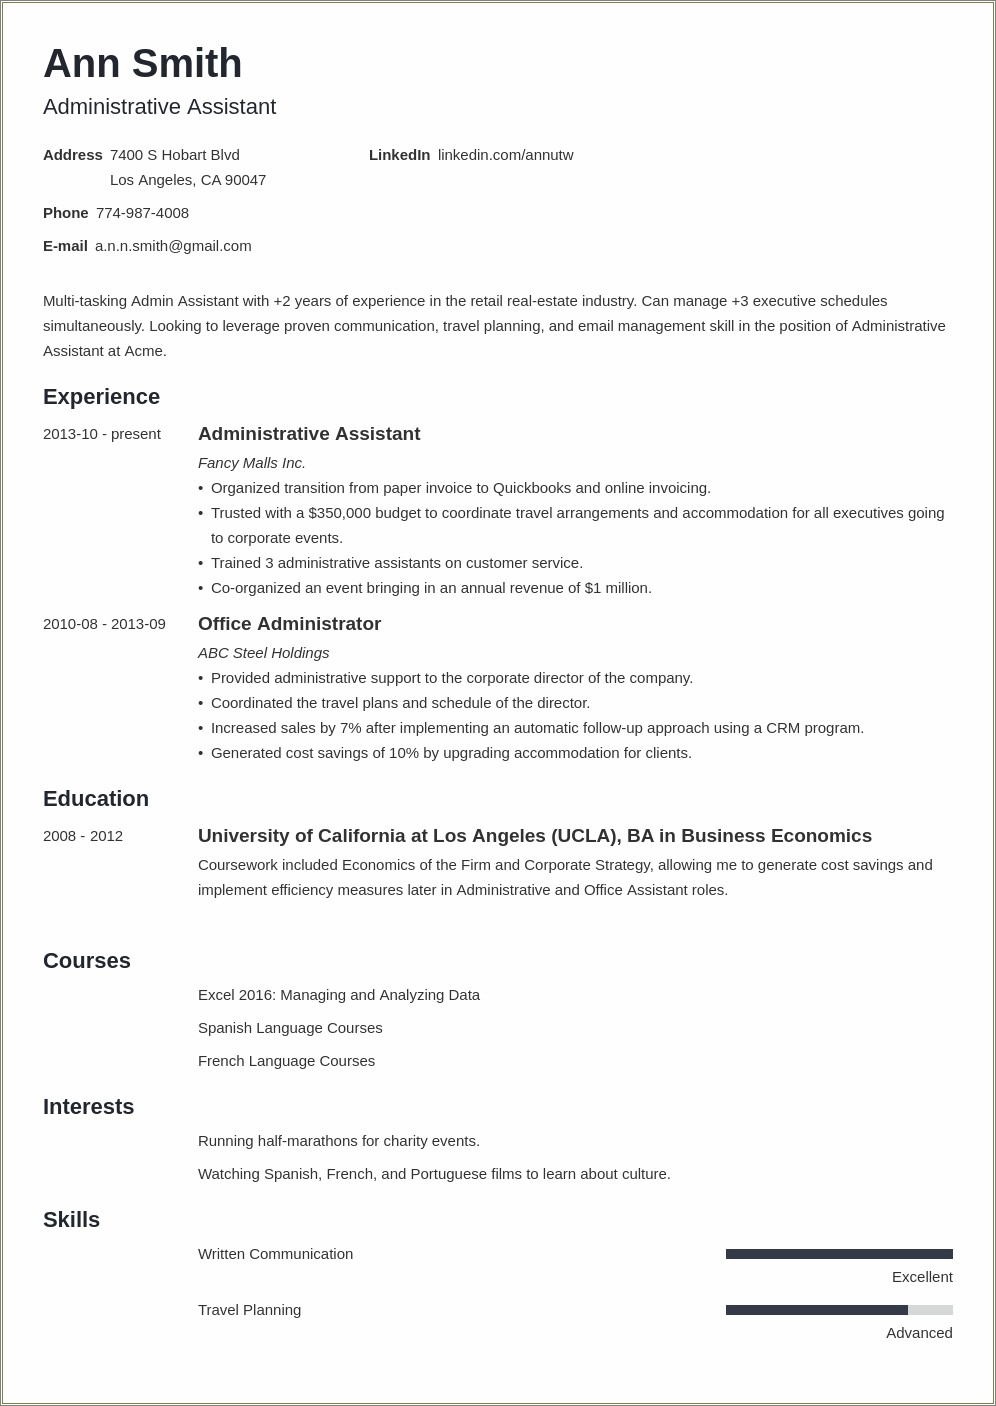 Resume Summary Examples For Change Management Administrator